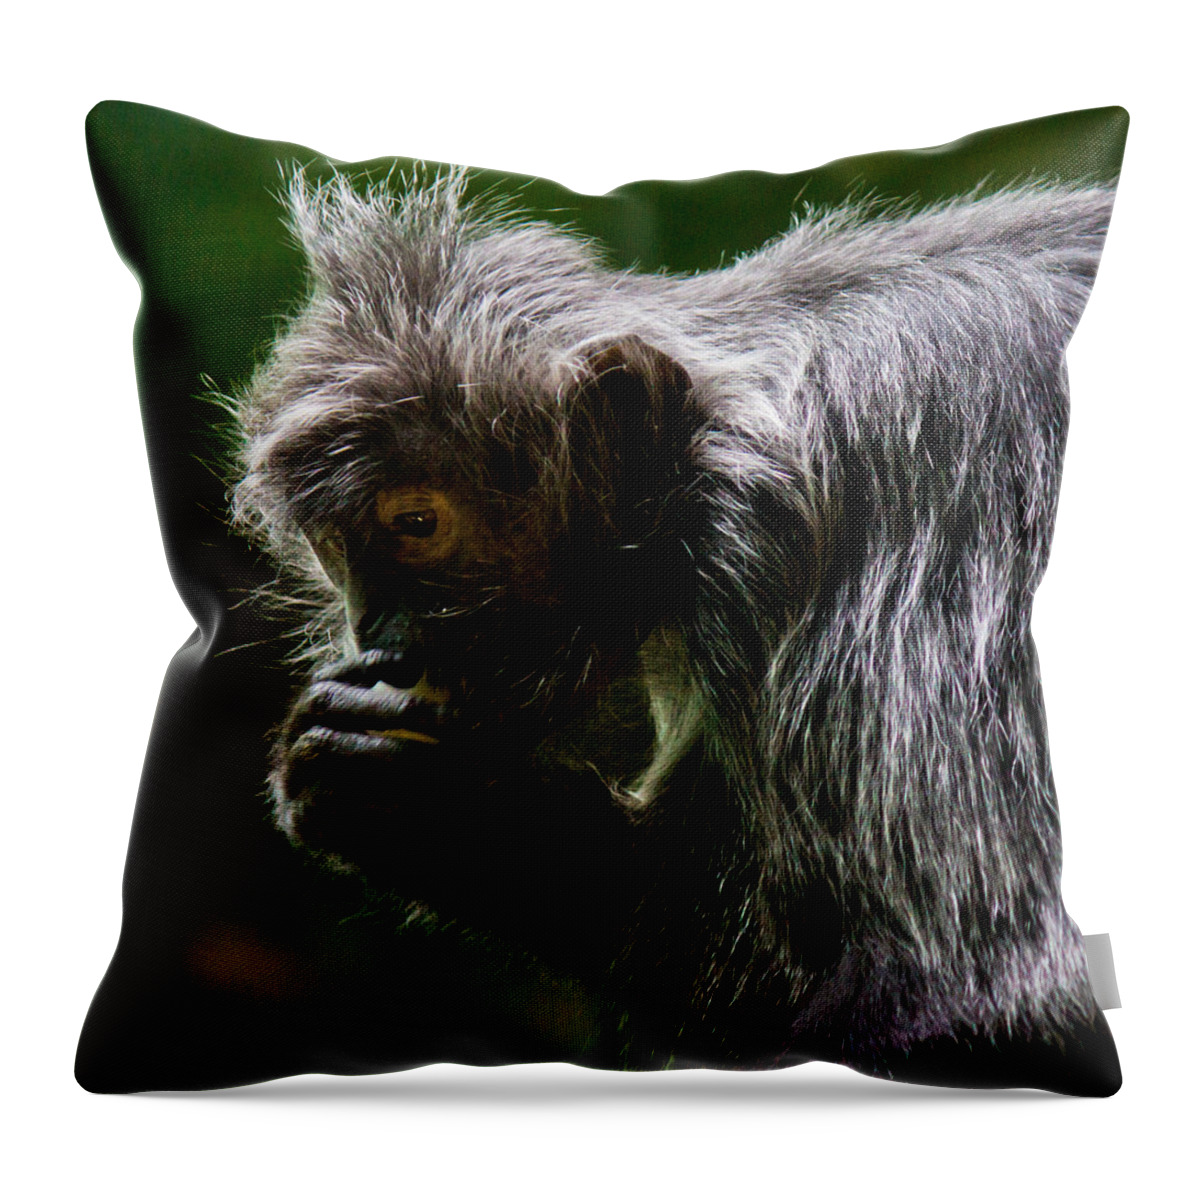 Small Throw Pillow featuring the photograph Small Monkey Eating by Jonny D